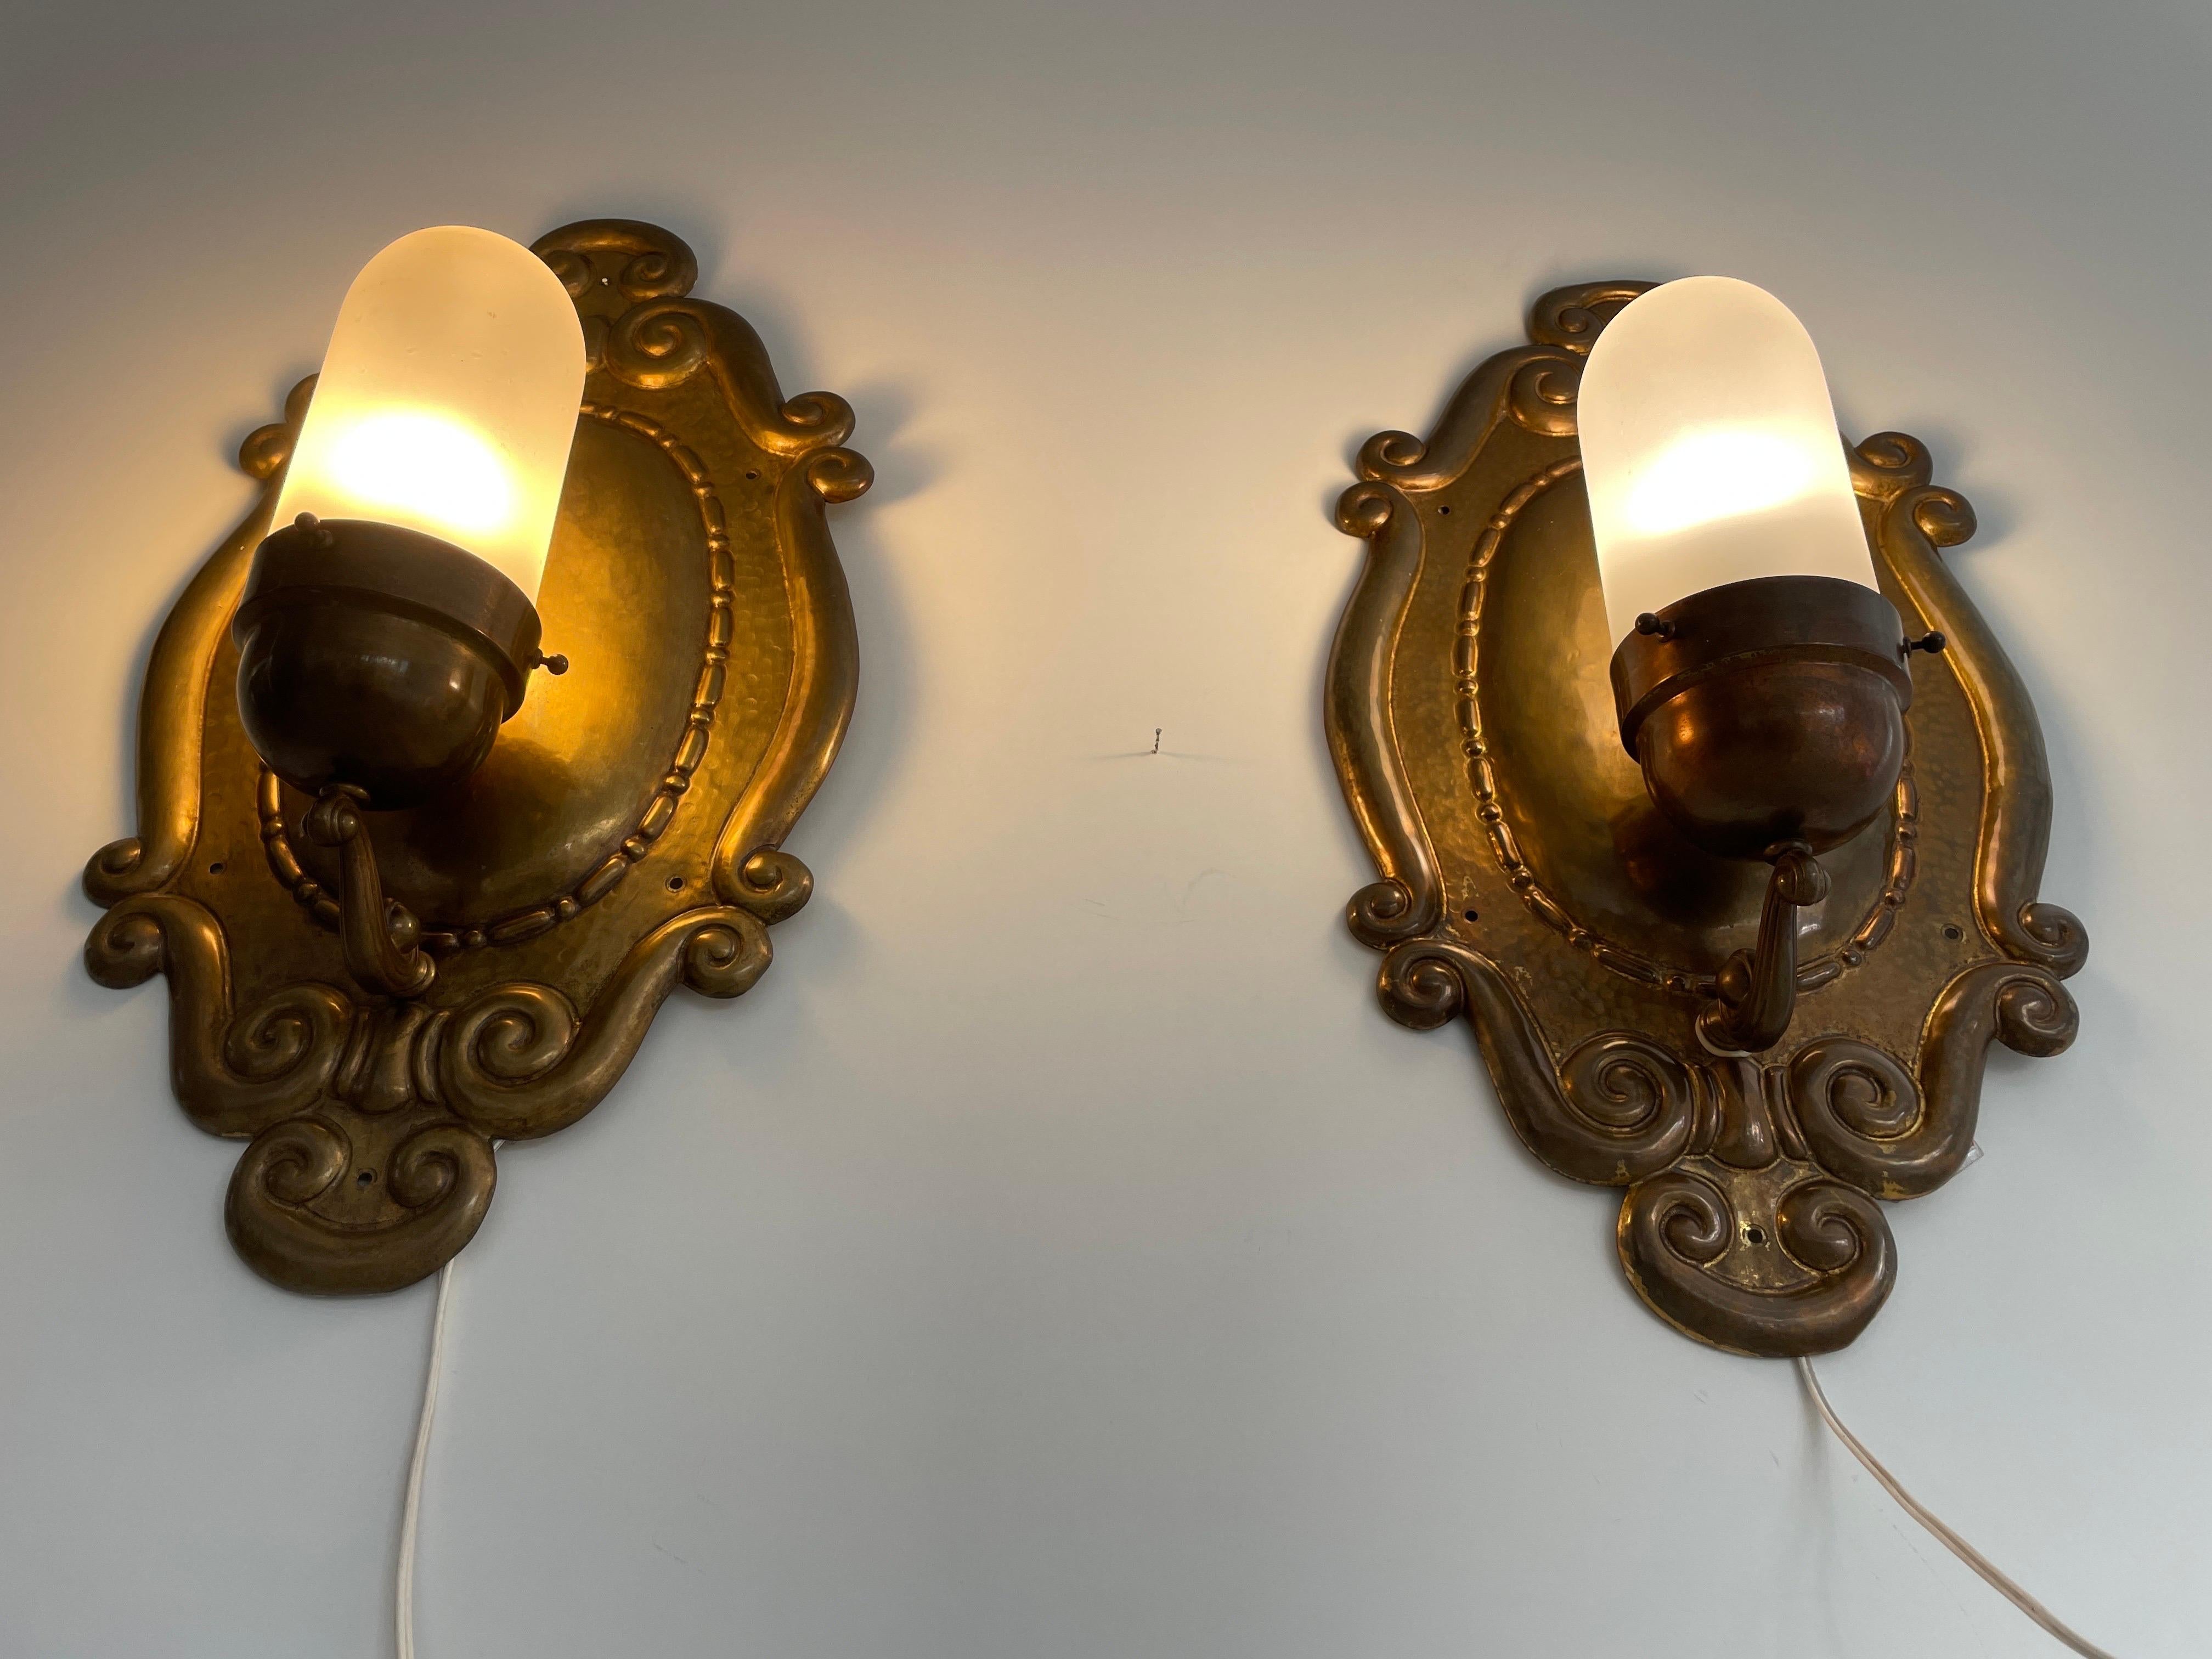 Exceptional Art Deco Glass and Copper Body Pair of Sconces, 1940s, Germany For Sale 5